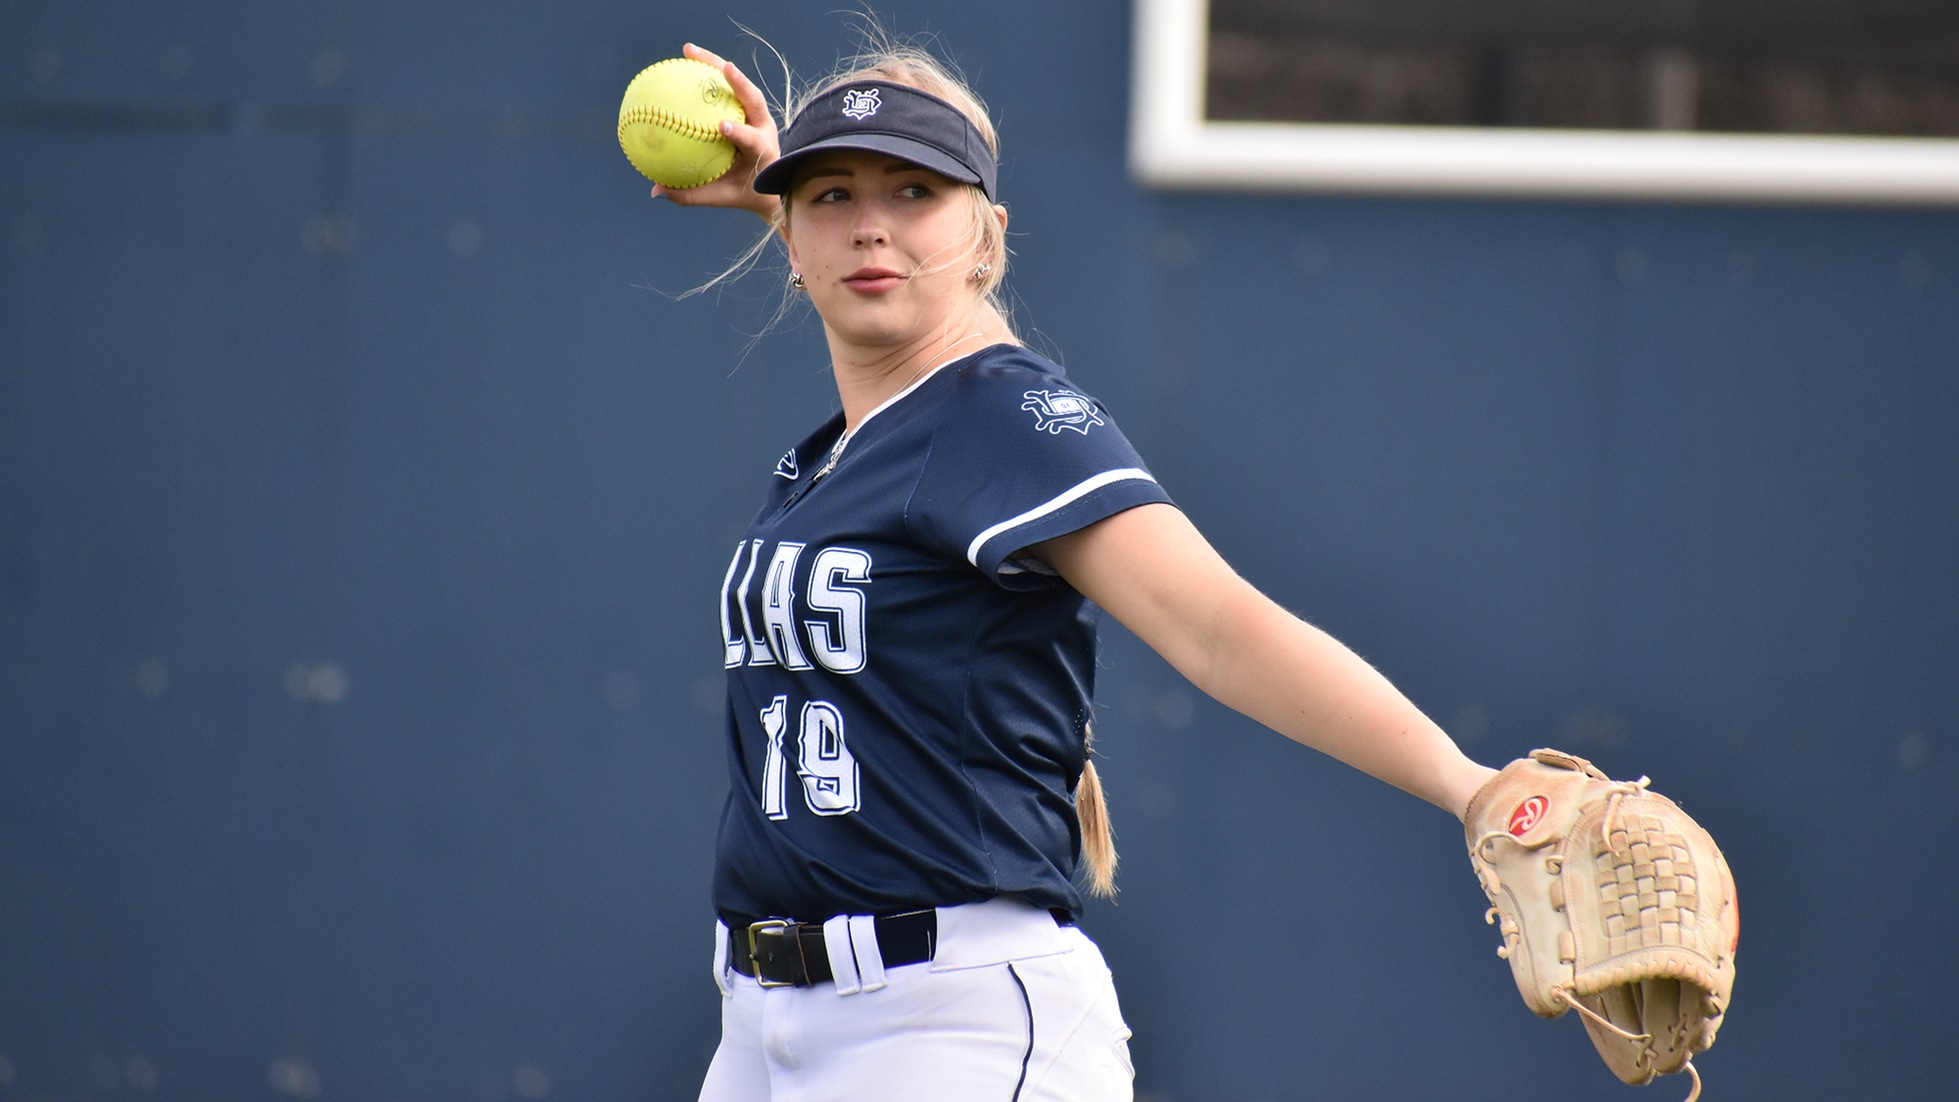 SERIES PREVIEW: UD Softball Plays 1st Road SCAC Series at Centenary (3/7-3/8)